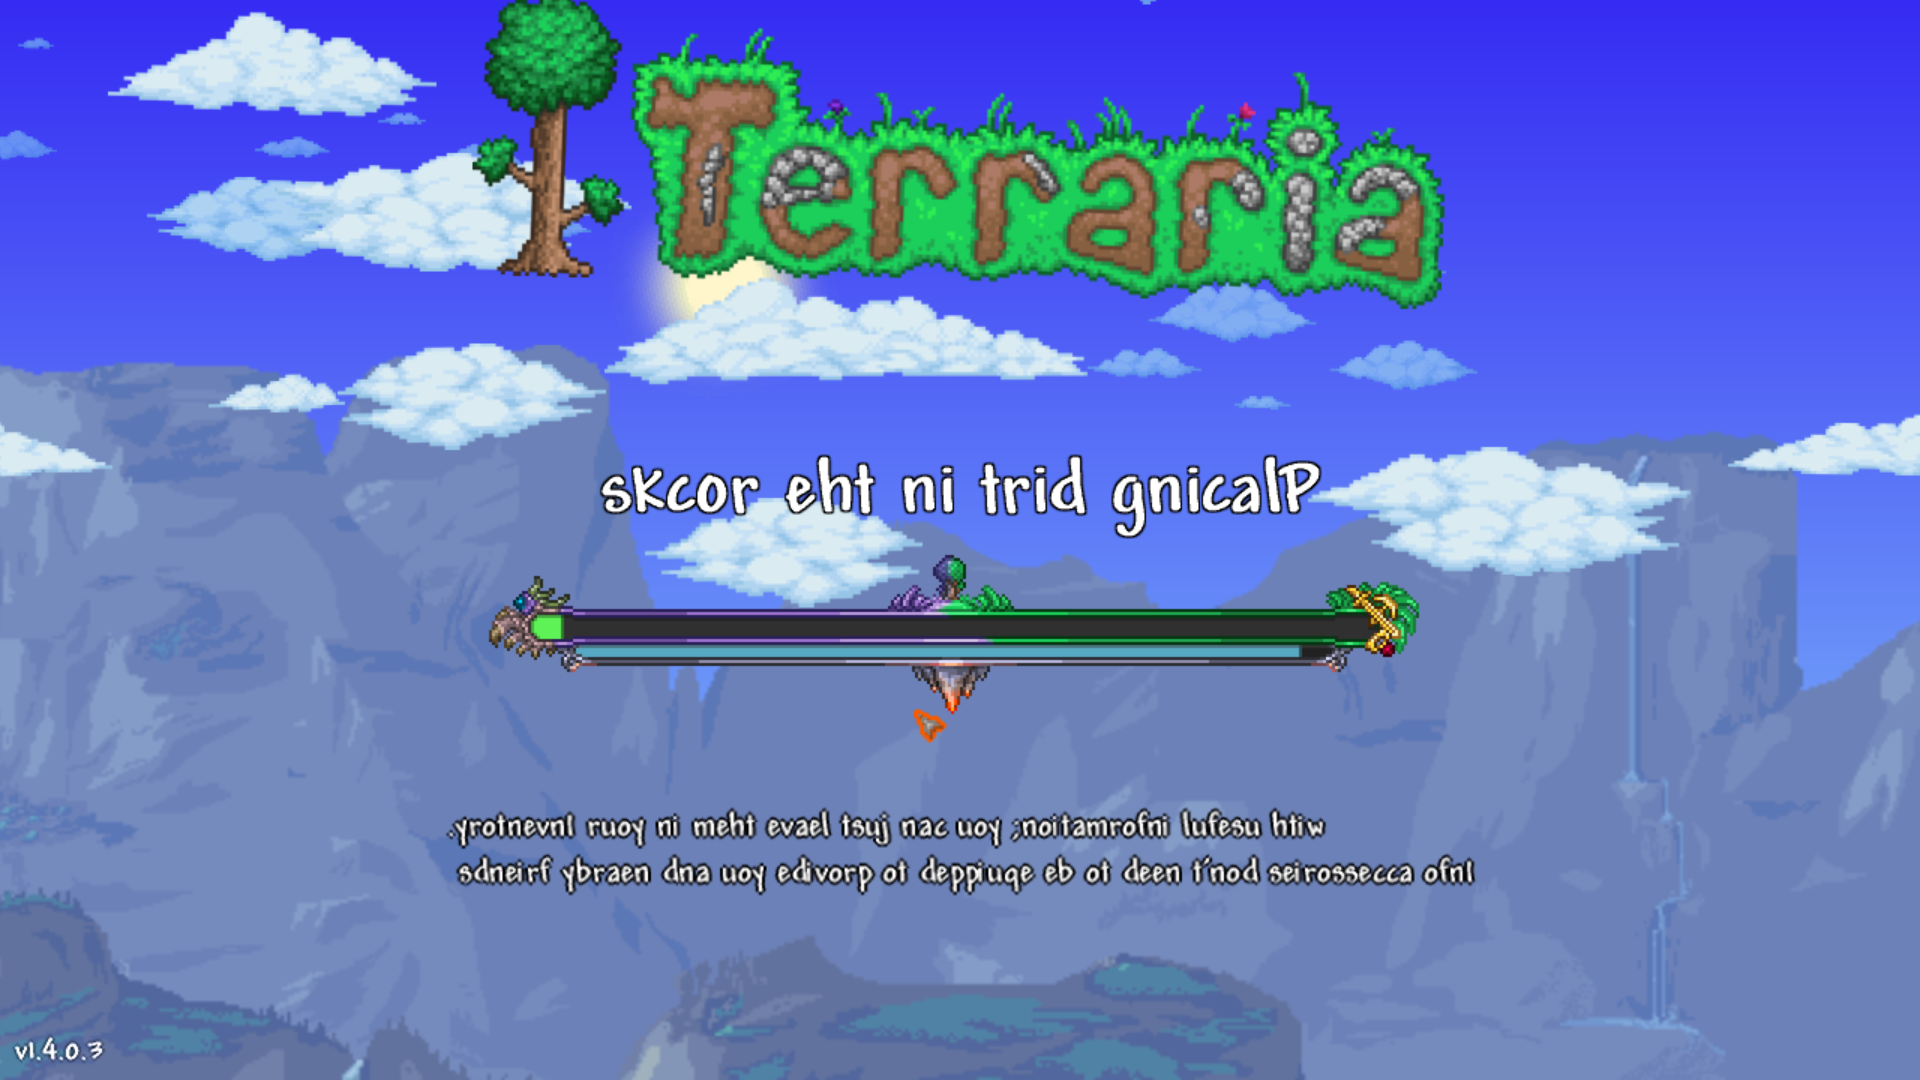 Top 30 Terraria Seeds - Best Seeds for Terraria 1.3.5